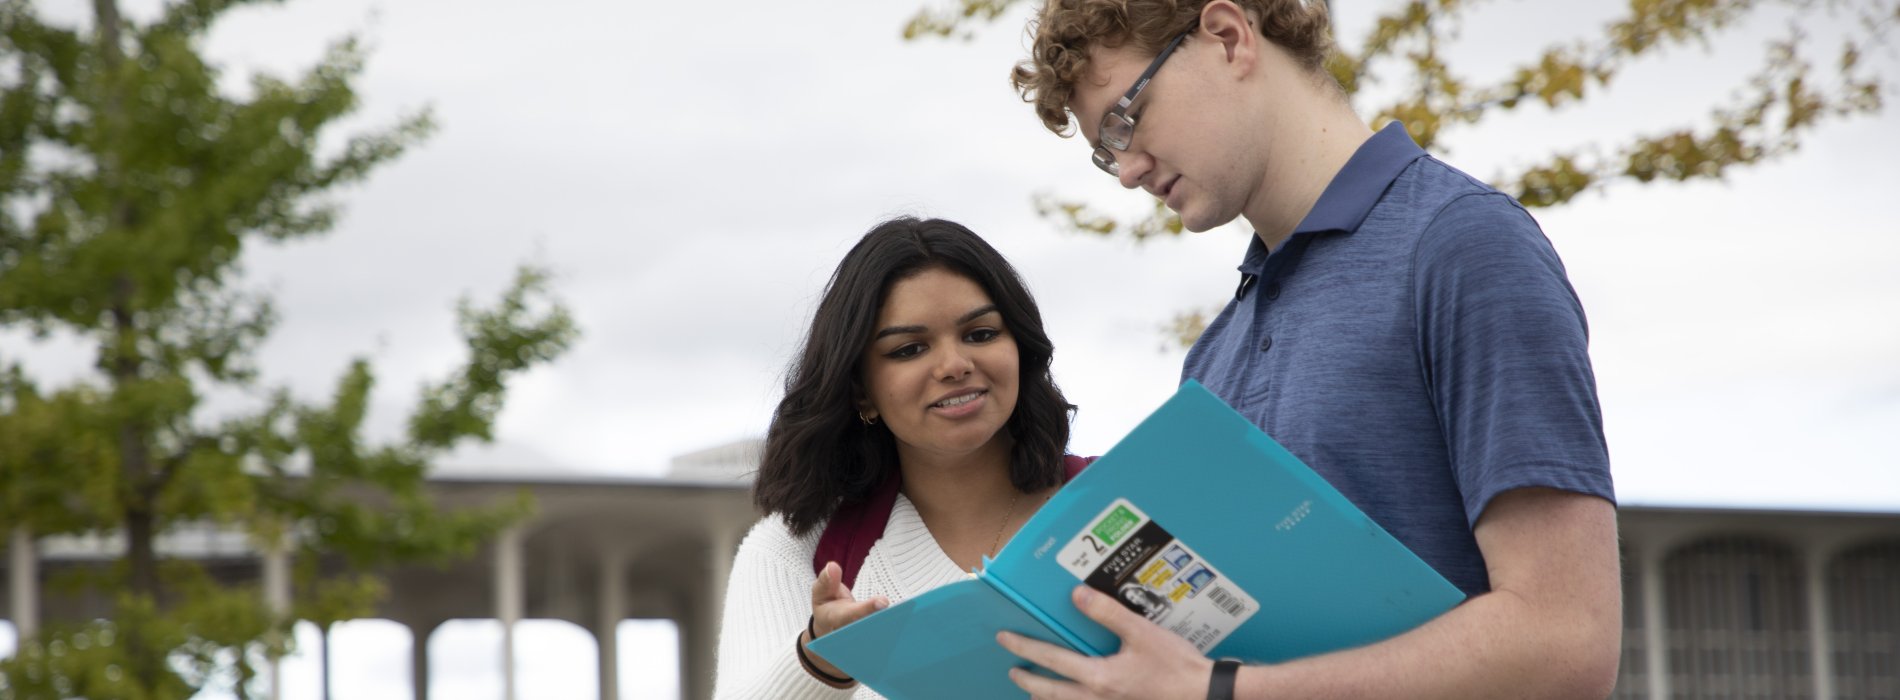 A student holds a notebook to study with classmate outside on campus